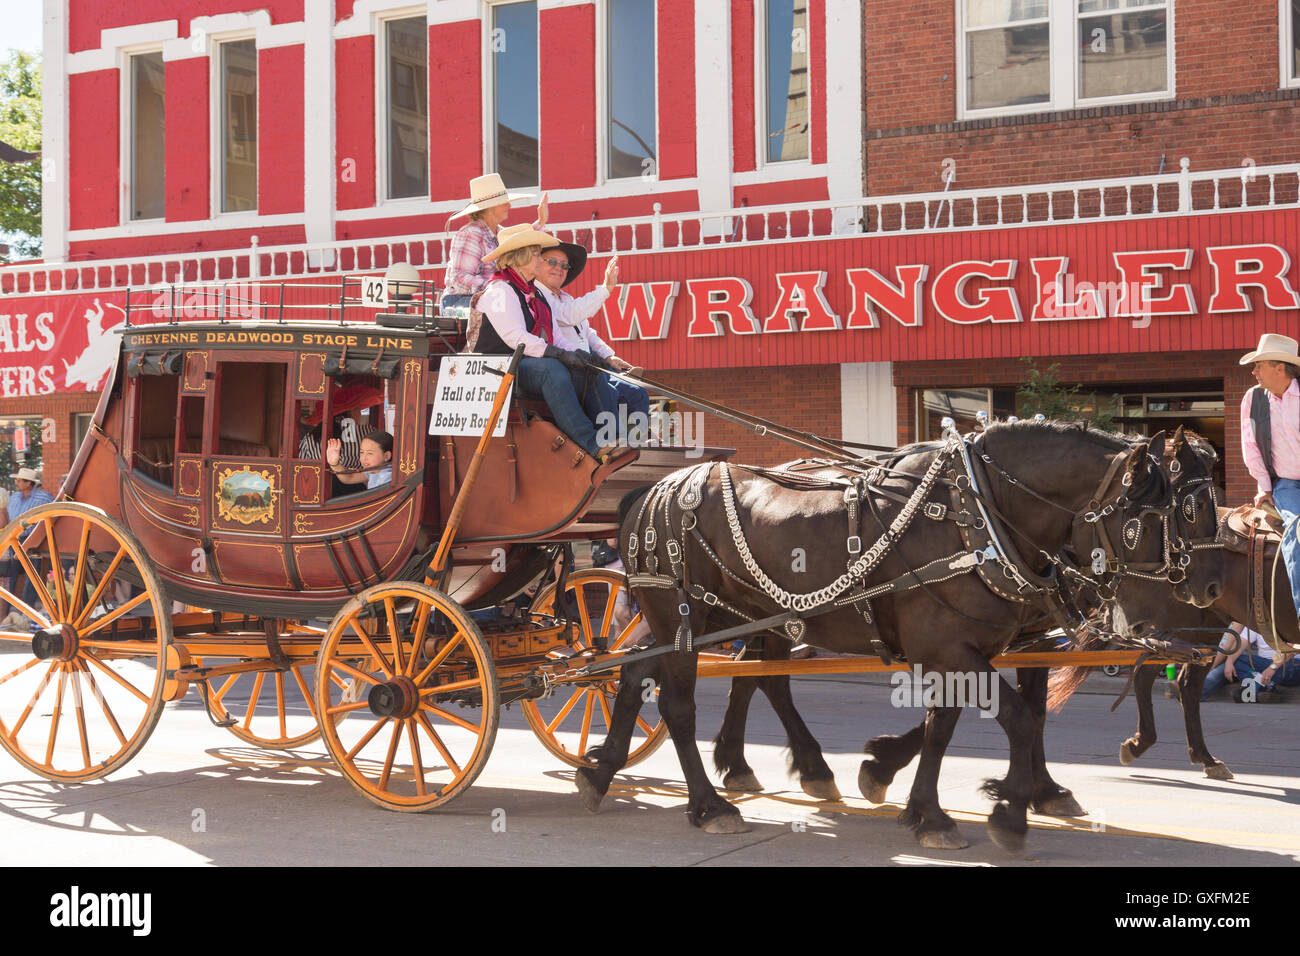 A stagecoach wagon pasts the Wrangler western wear store during the Cheyenne Frontier Days parade through the state capital July 23, 2015 in Cheyenne, Wyoming. Frontier Days celebrates the cowboy traditions of the west with a rodeo, parade and fair. Stock Photo